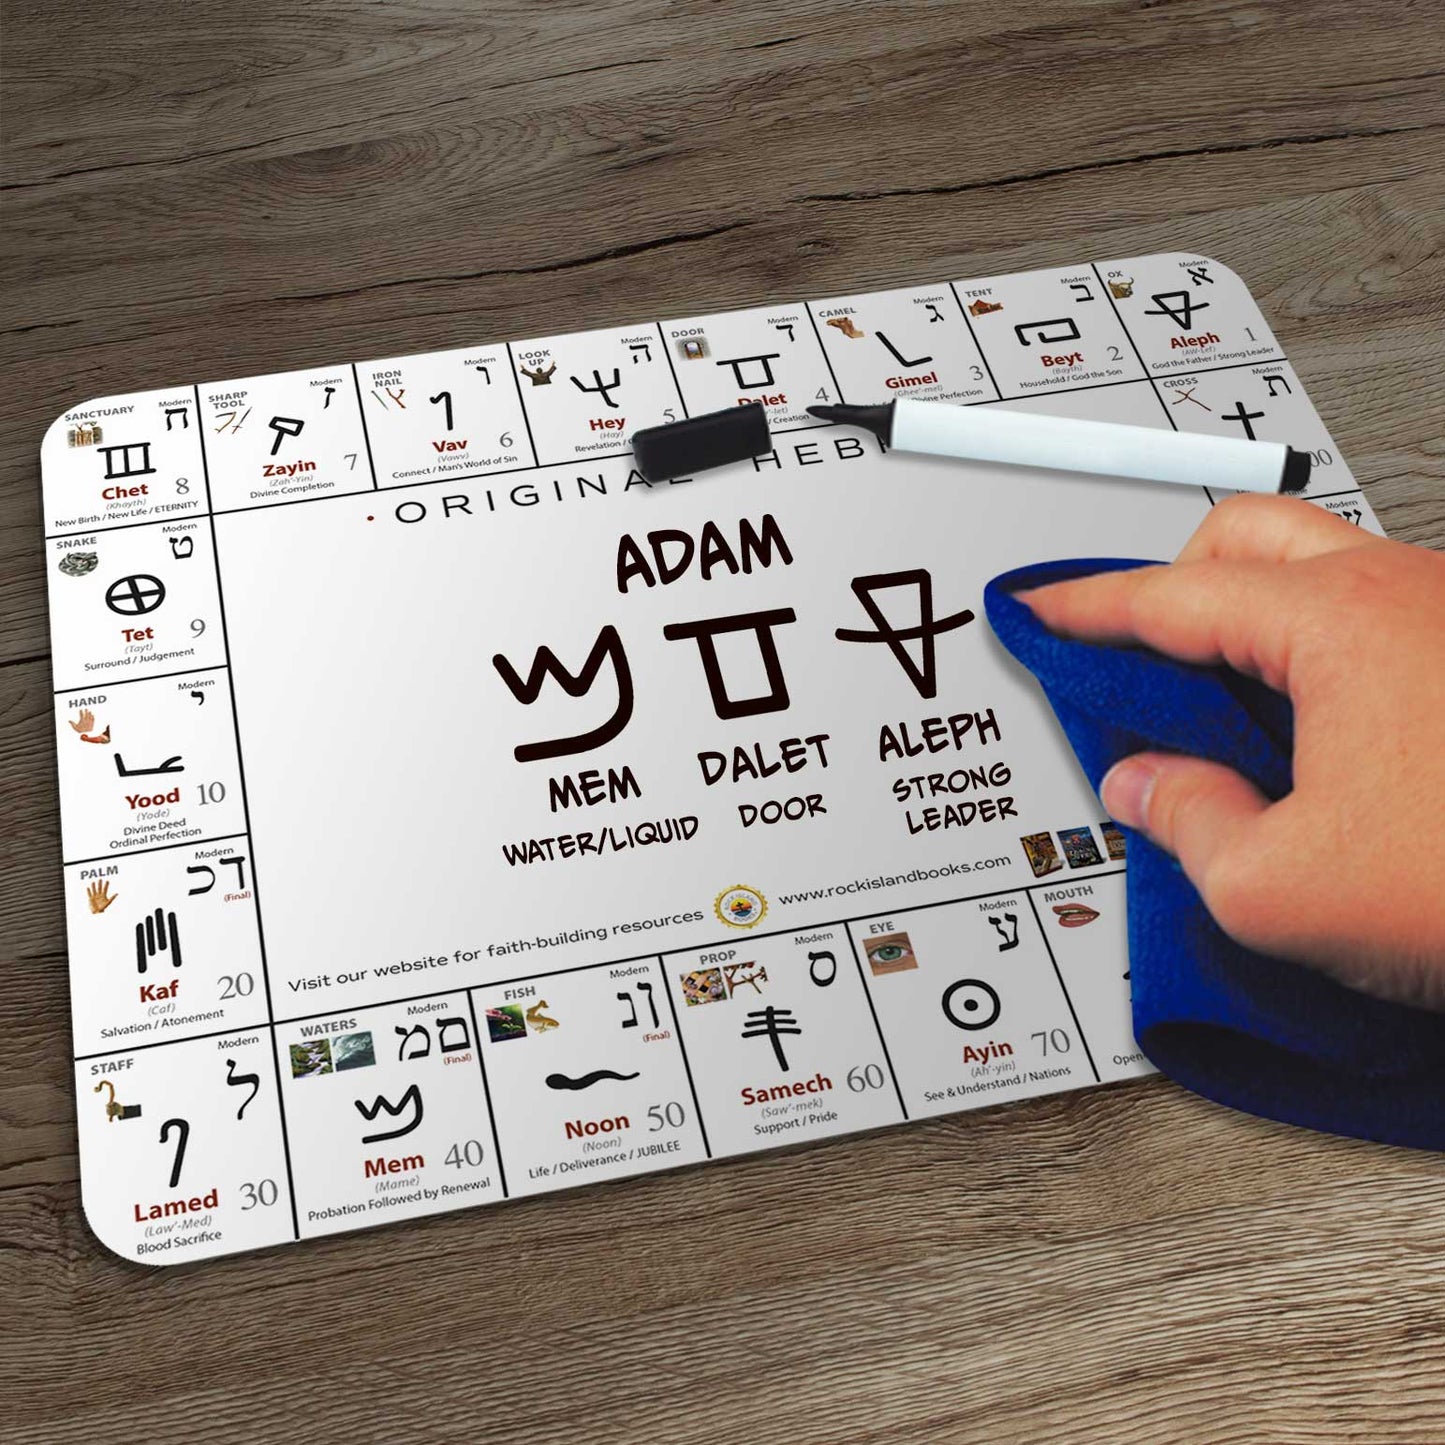 3-Piece Bundle Special! - Hebrew Language Package: Hebrew Book, Hebrew Letter Whiteboard and Hebrew Teaching Cards